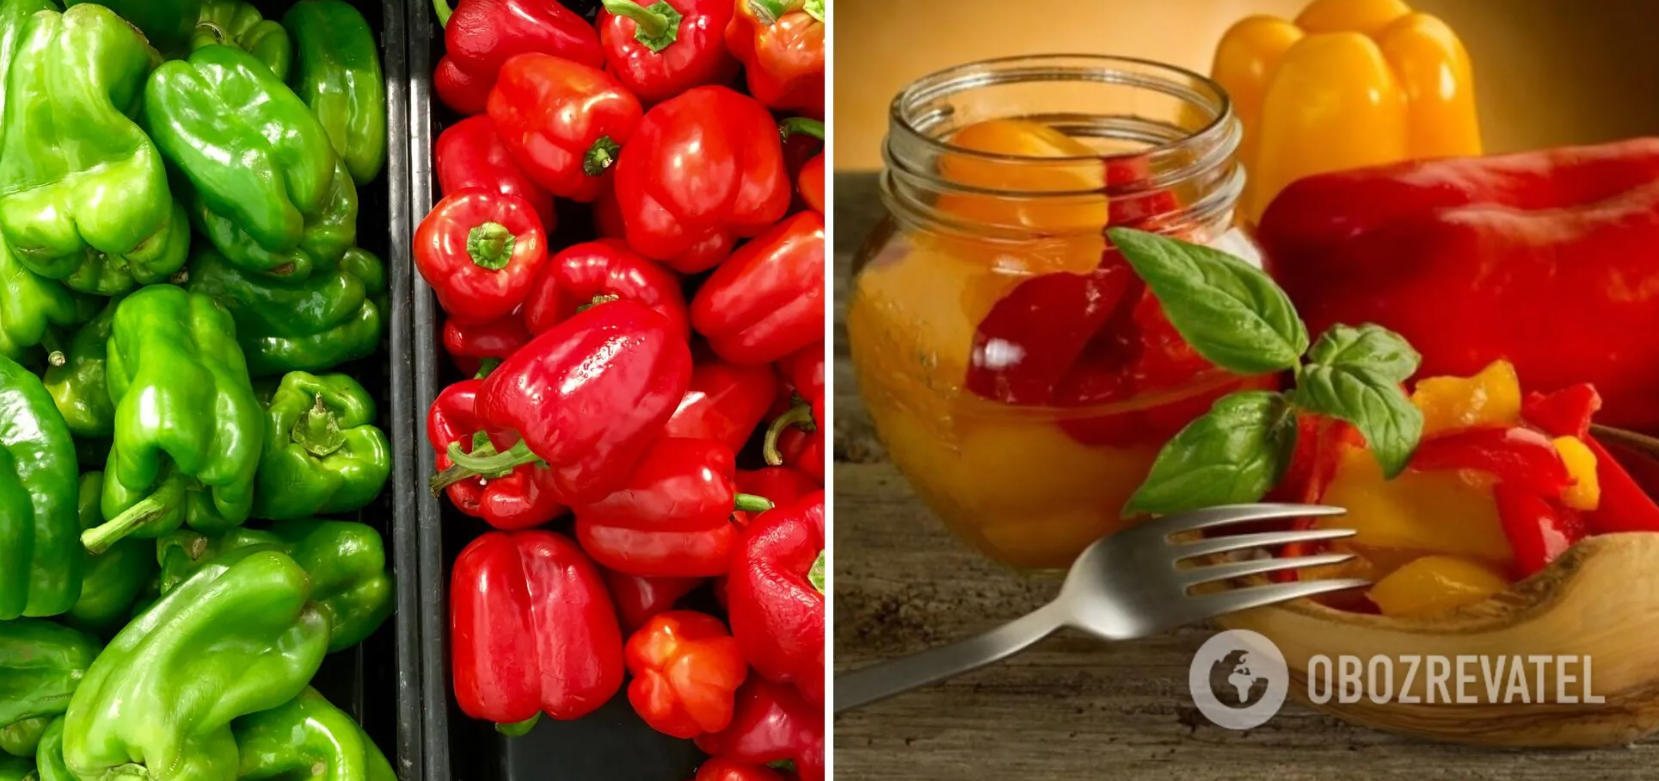 How to cook peppers deliciously